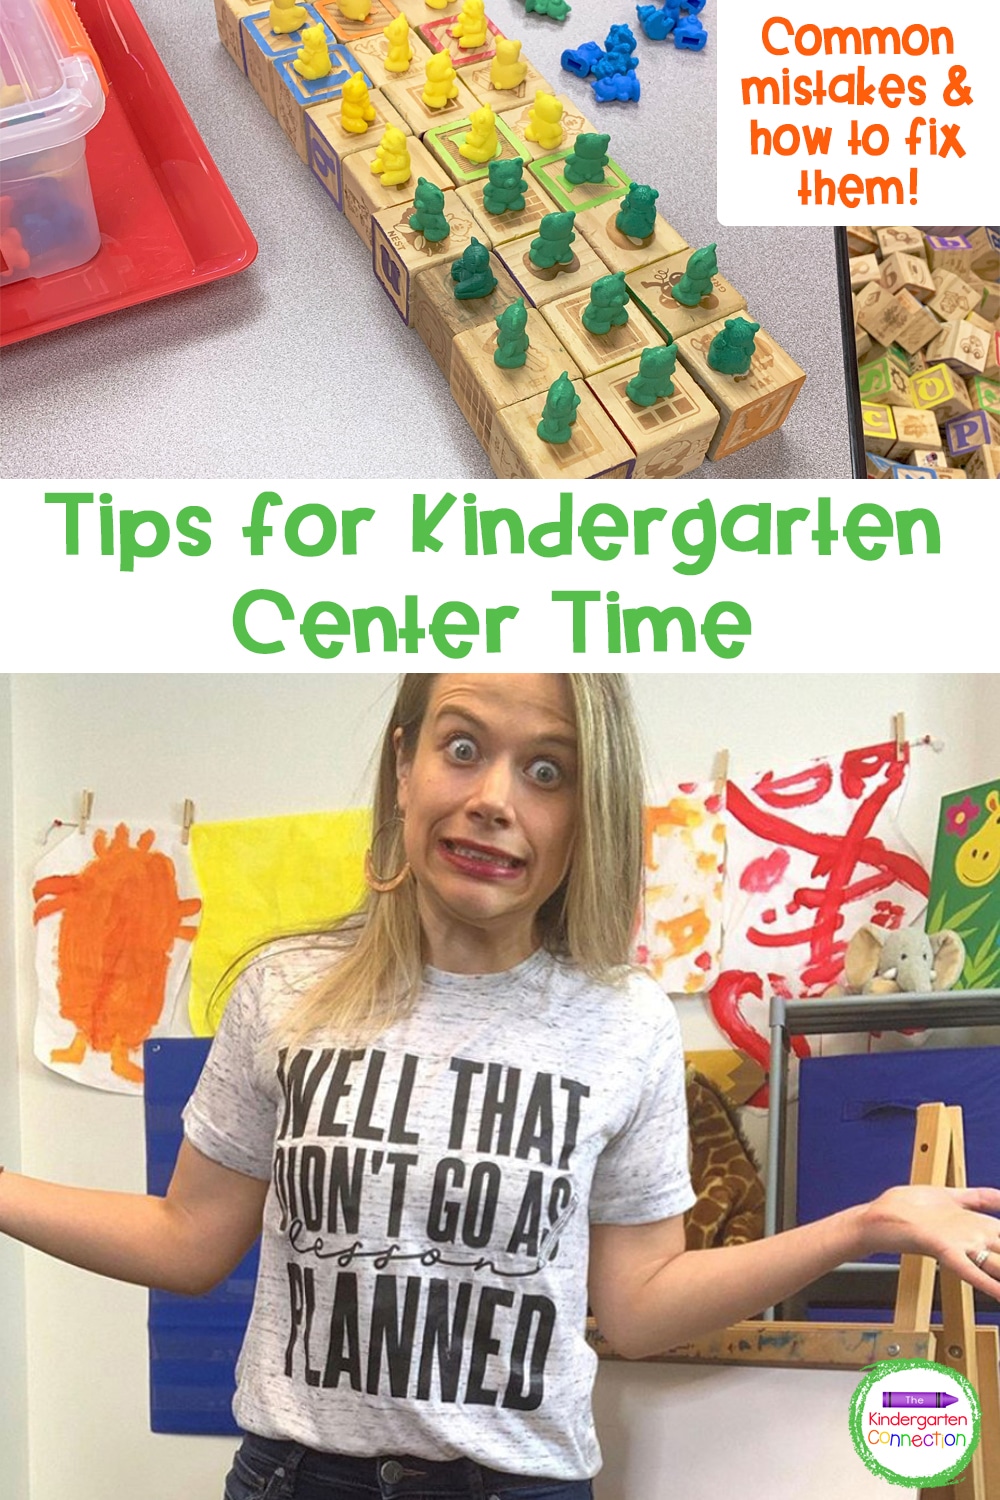 Check out my 3 best tips for center time in Kindergarten that will help you fix or avoid common mistakes and make centers feel like a breeze!